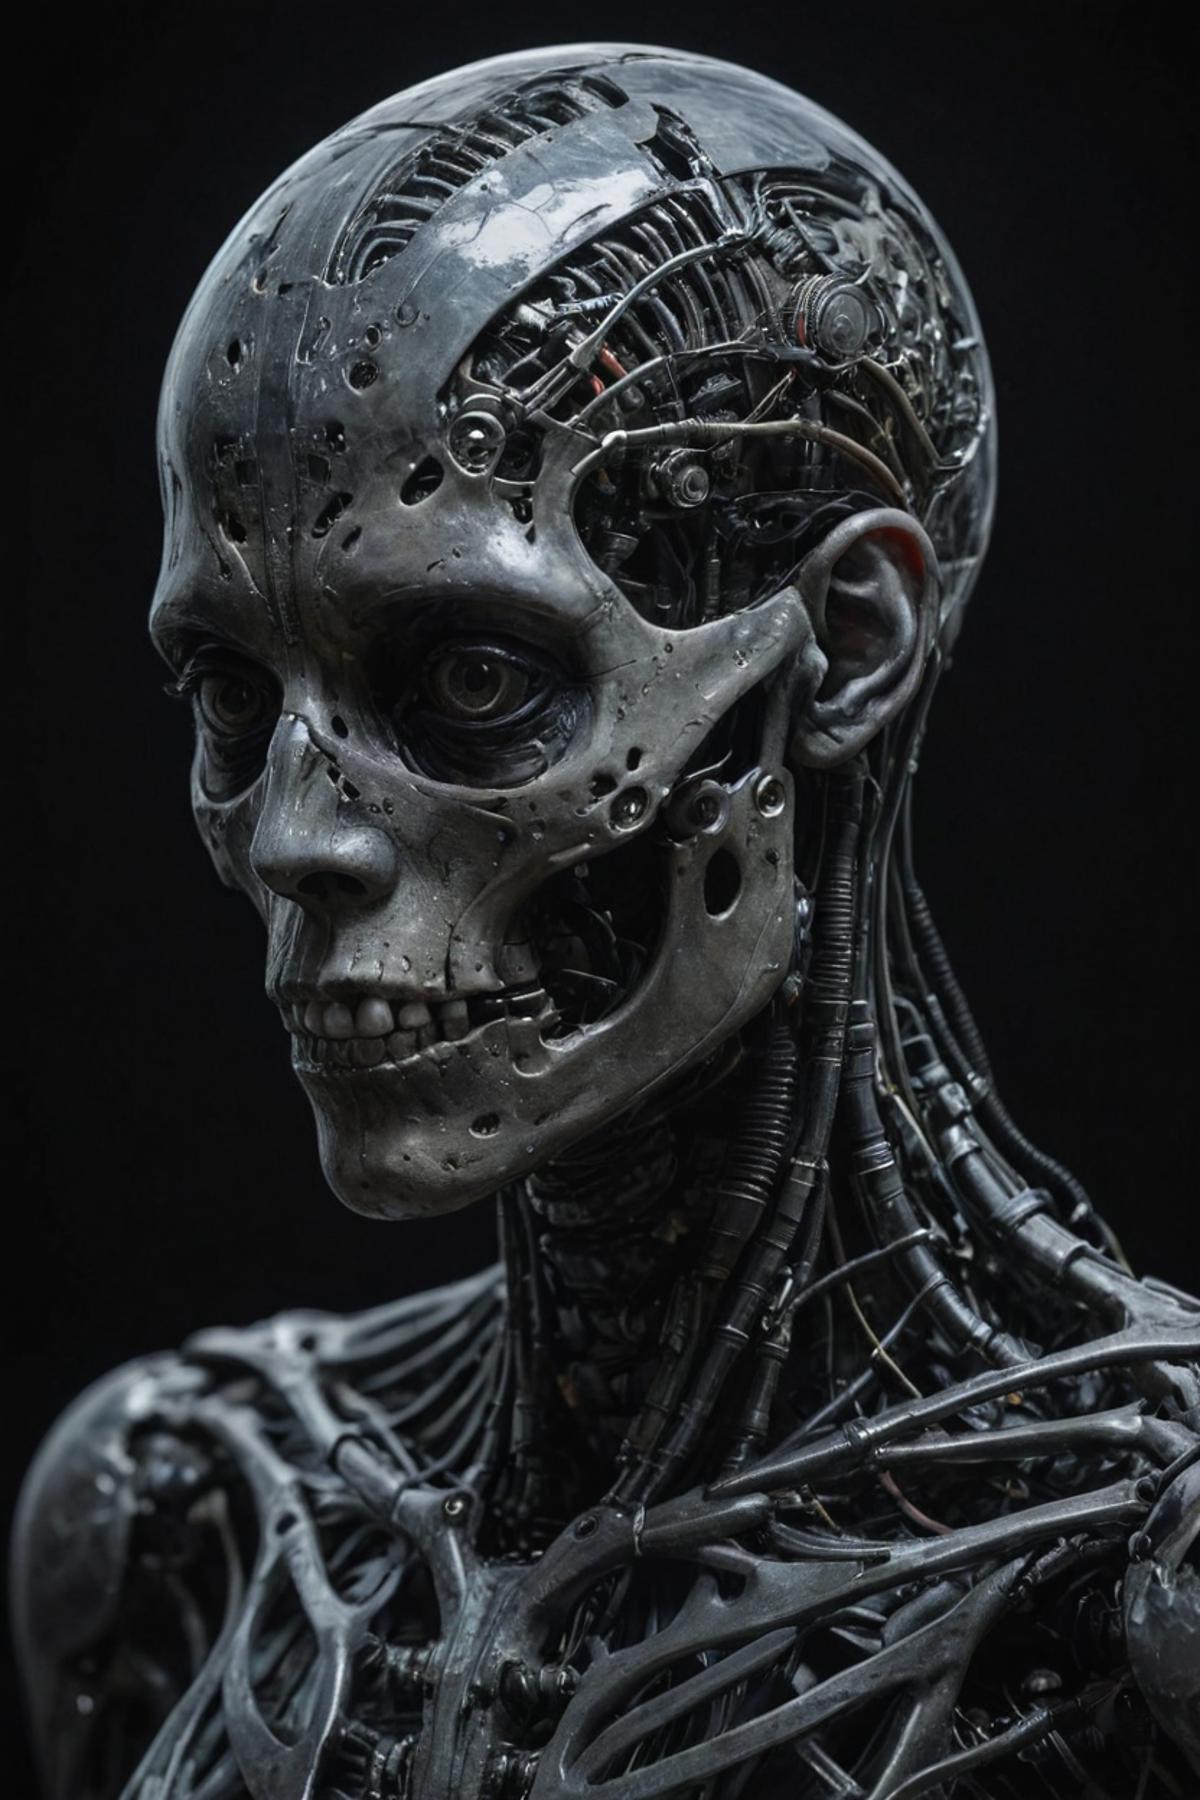 A close-up of a robot head featuring a skeleton face with wires and gears, reminiscent of a futuristic cyborg.